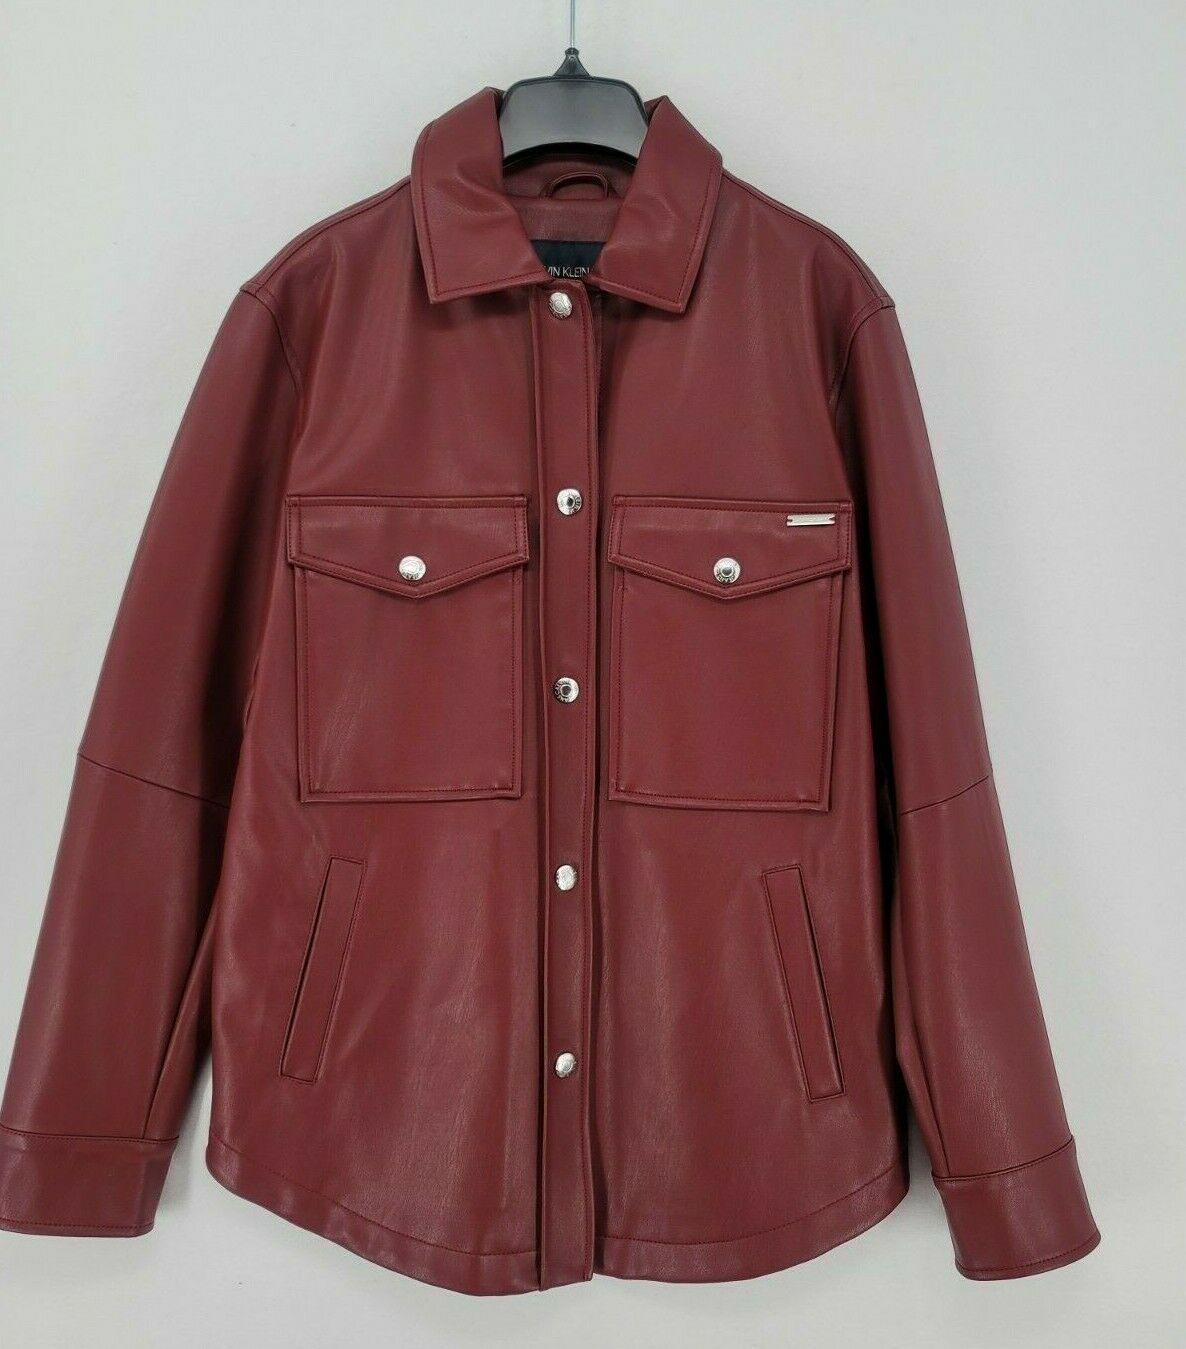 CALVIN KLEIN JEANS Women's Faux-Leather Button-Front Shirt Jacket Wine S - SVNYFancy